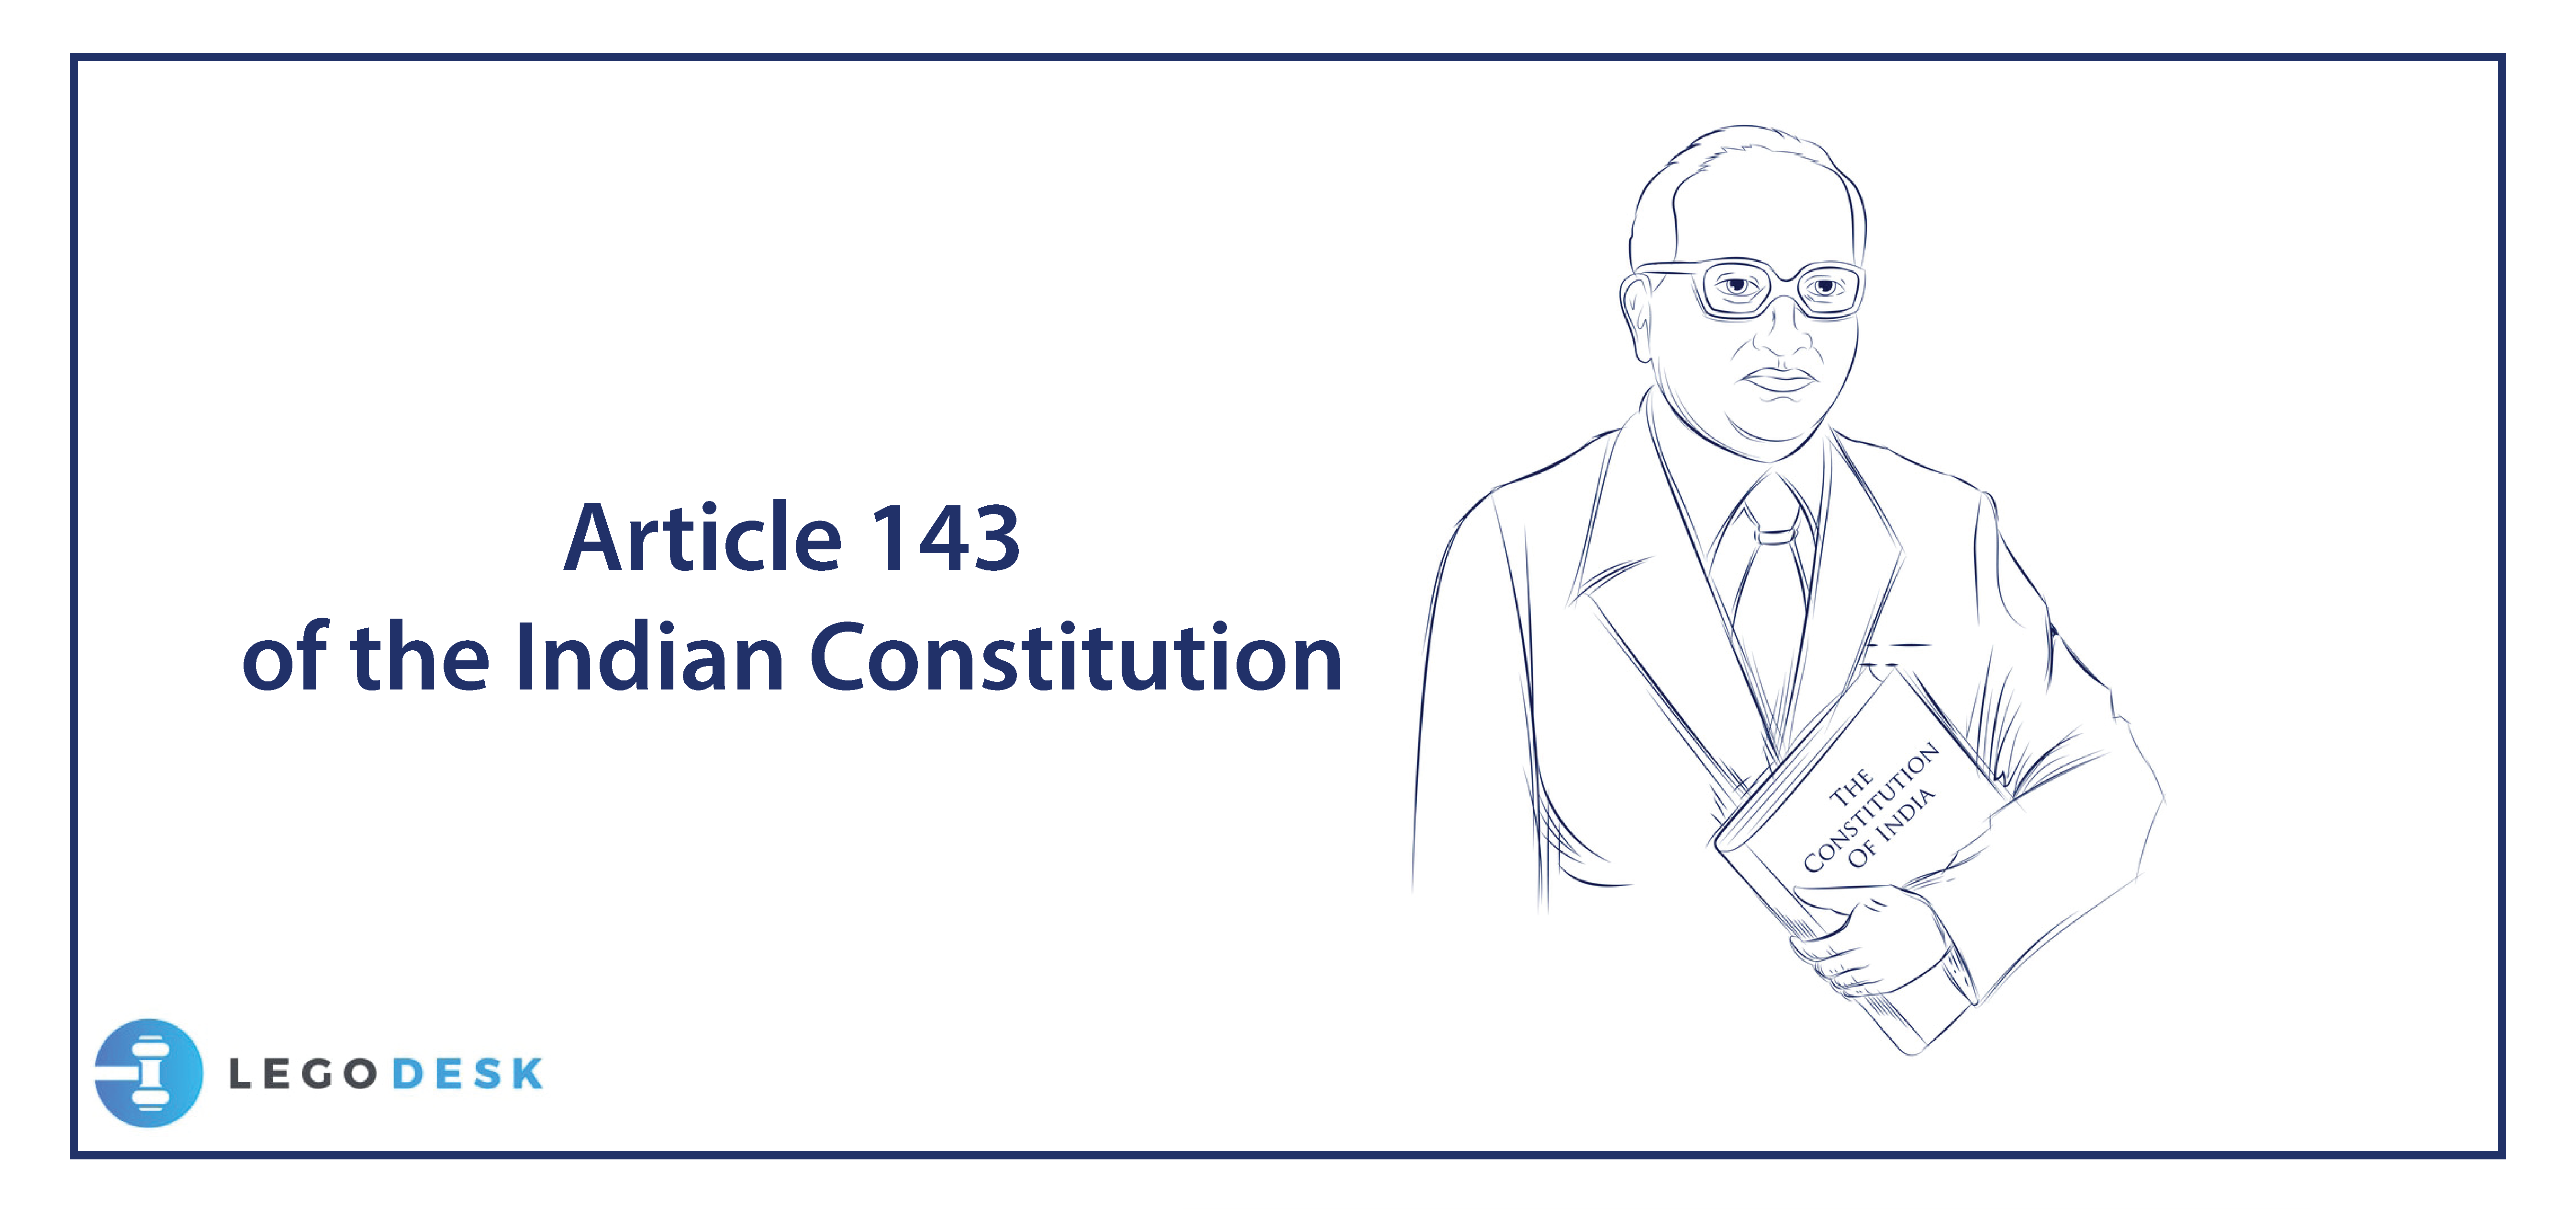 Article 143 of the Indian Constitution